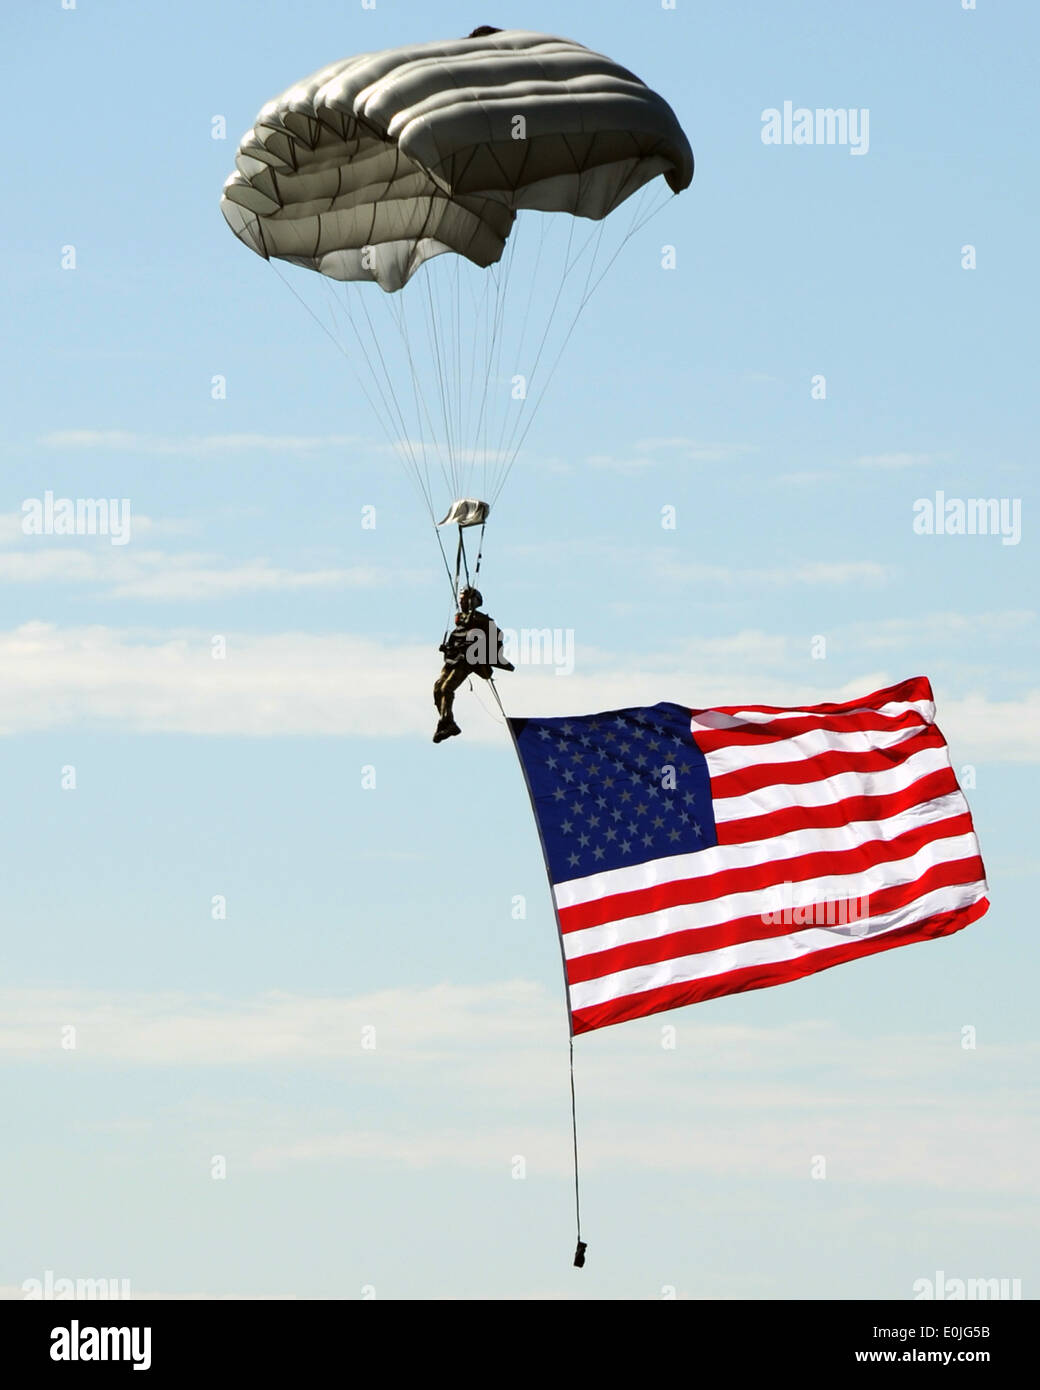 JOINT BASE LEWIS-MCCHORD, Wash. – An Airman parachutes to the ground from a C-17 Globemaster III while streaming an American Stock Photo